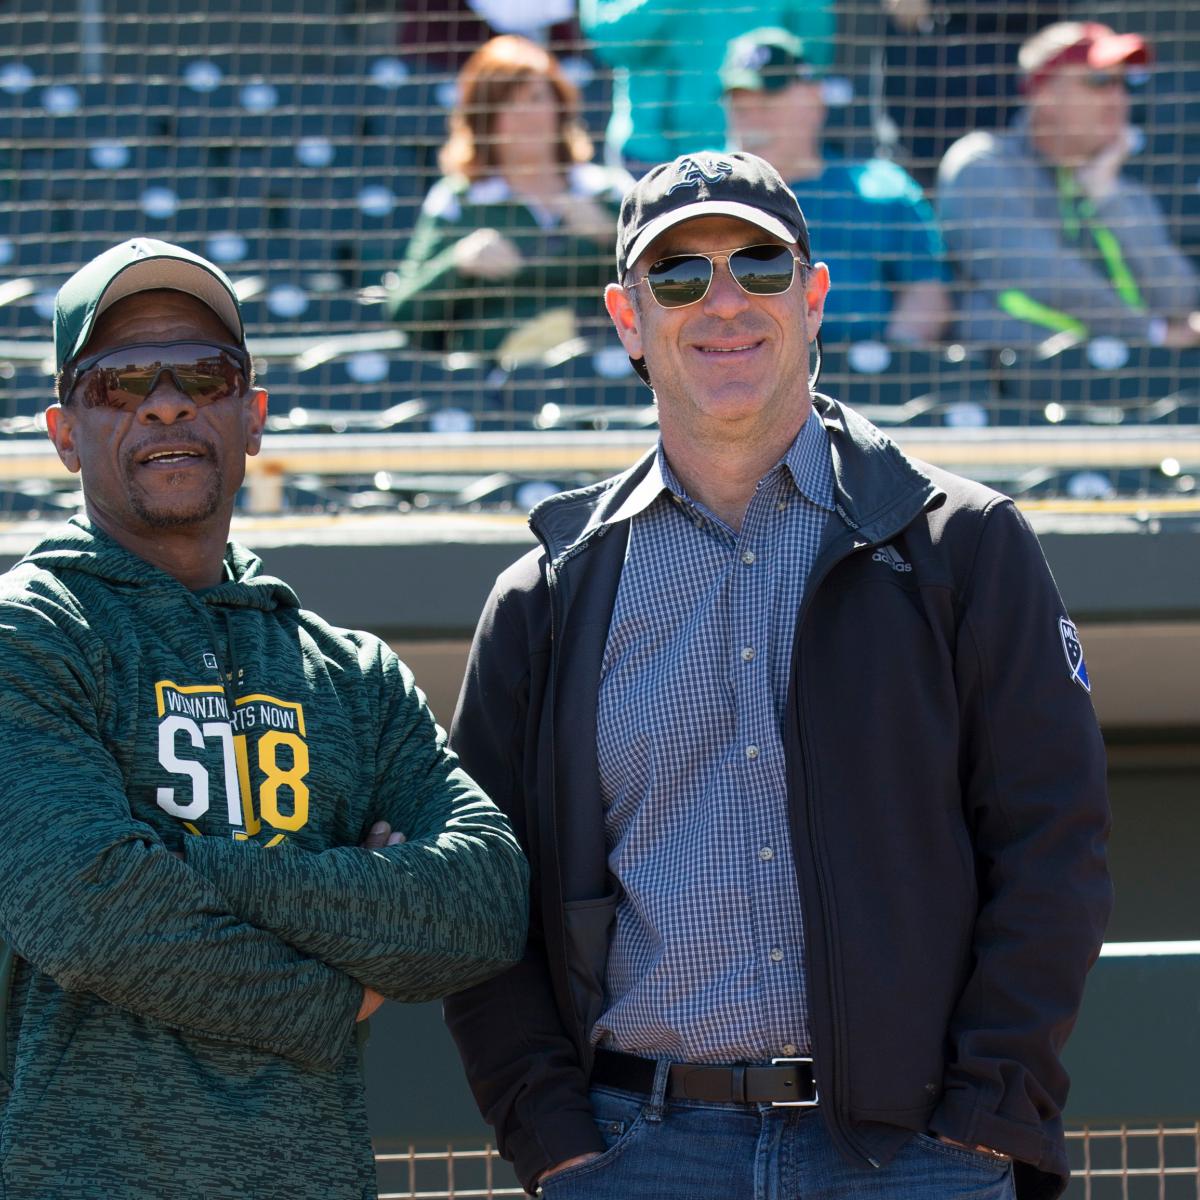 Who is Oakland A's owner John Fisher?